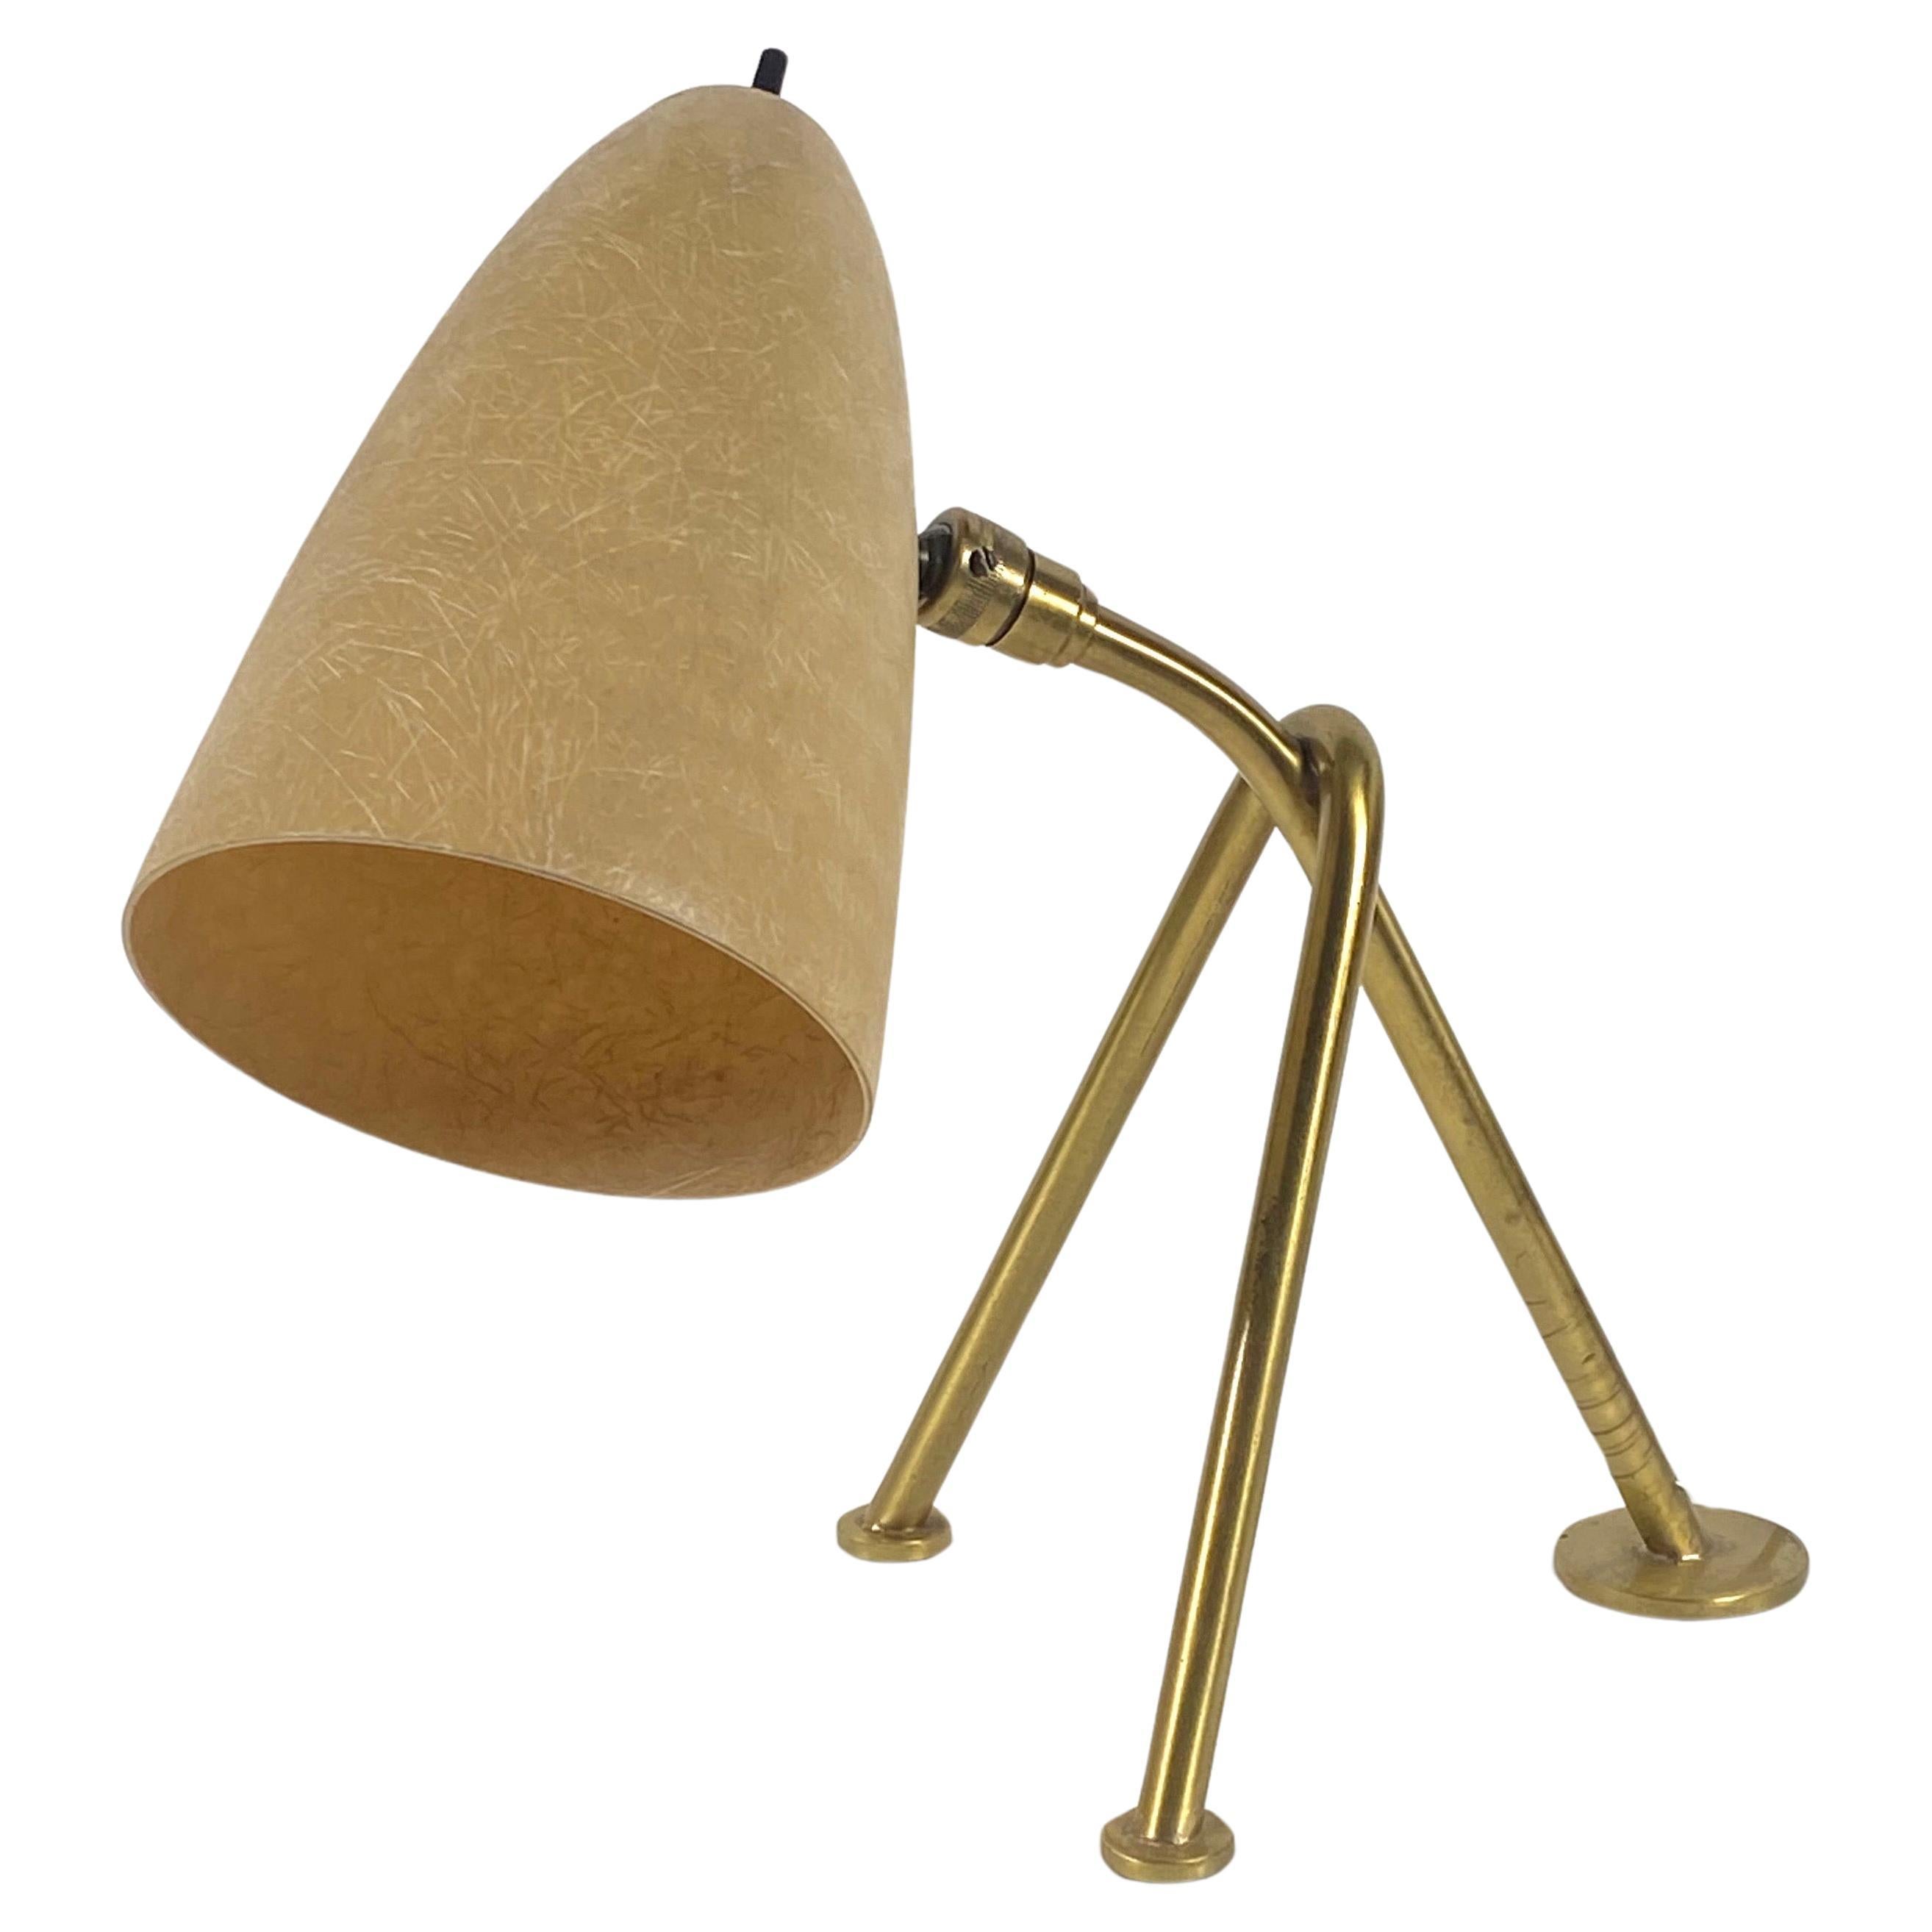 1950s Fiberglass and Brass Grasshopper Table Lamp For Sale at 1stDibs